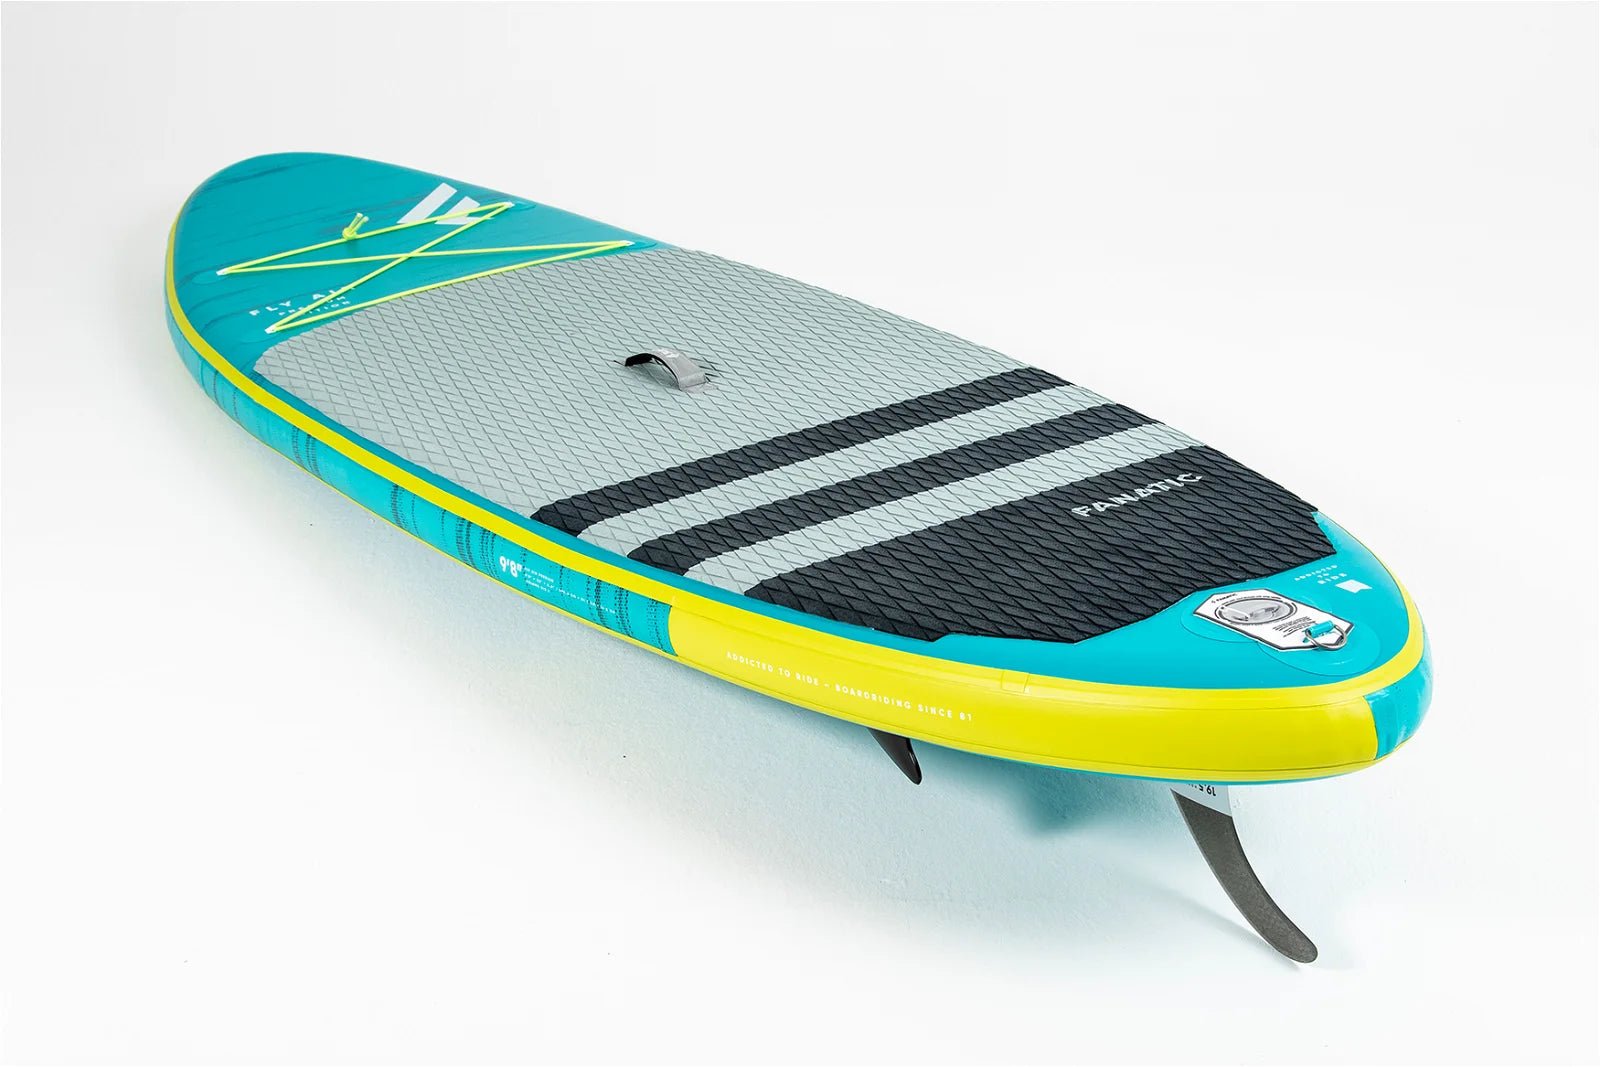 Fanatic Package Fly Air Premium/Pure 2022 iSUP Paddleboard - Worthing Watersports - 9008415938452 - iSUP Packages - Fanatic SUP